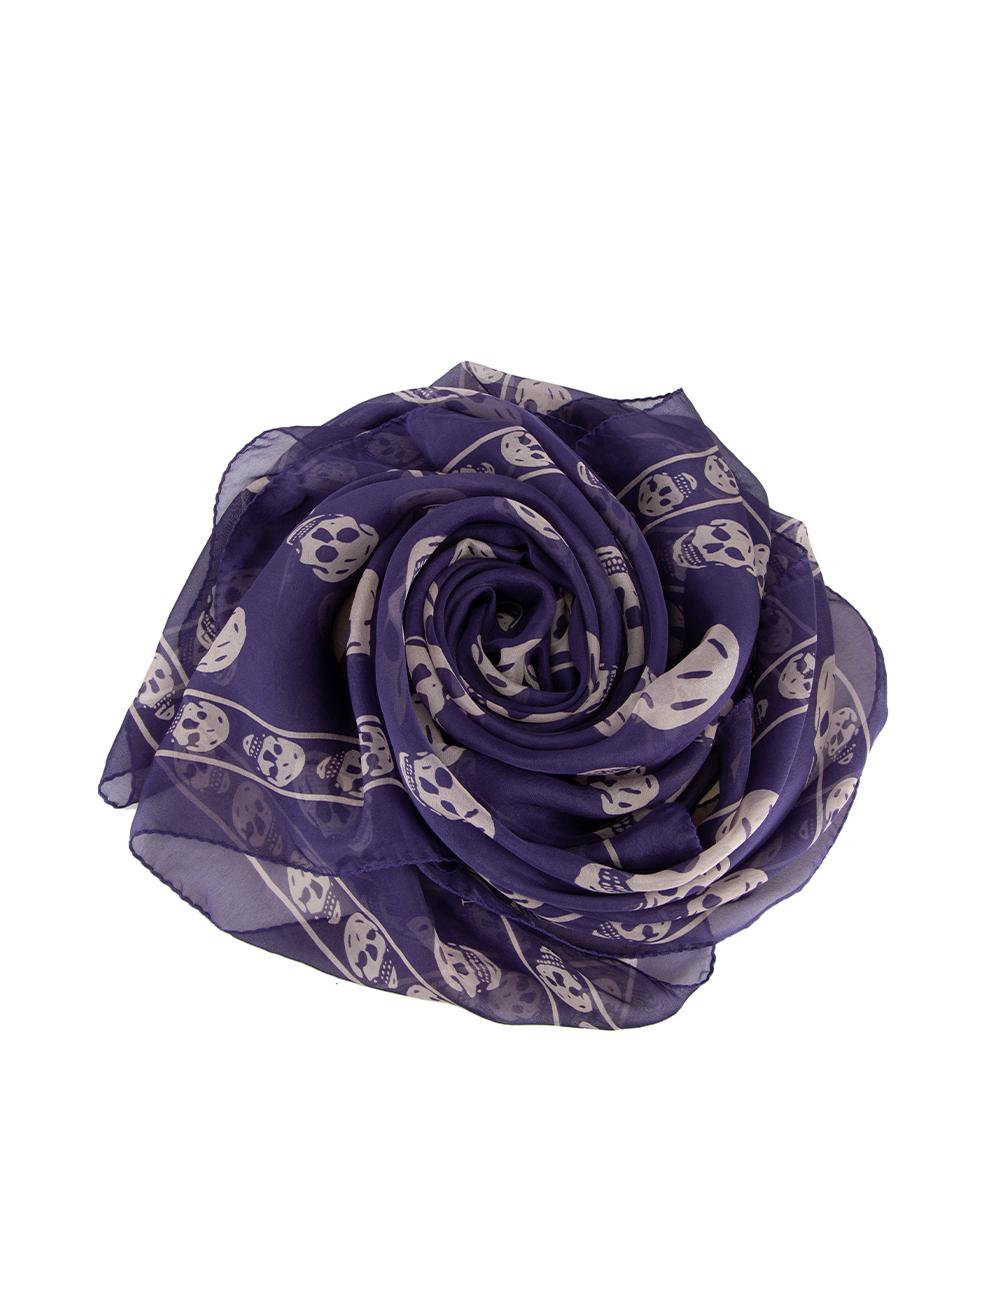 CONDITION is Very good. Hardly any visible wear to scarf is evident on this used Alexander McQueen designer resale item.



Details


Purple

Silk

Square scarf

See through chiffon

Skull printed pattern





Made in Italy



Composition

100%